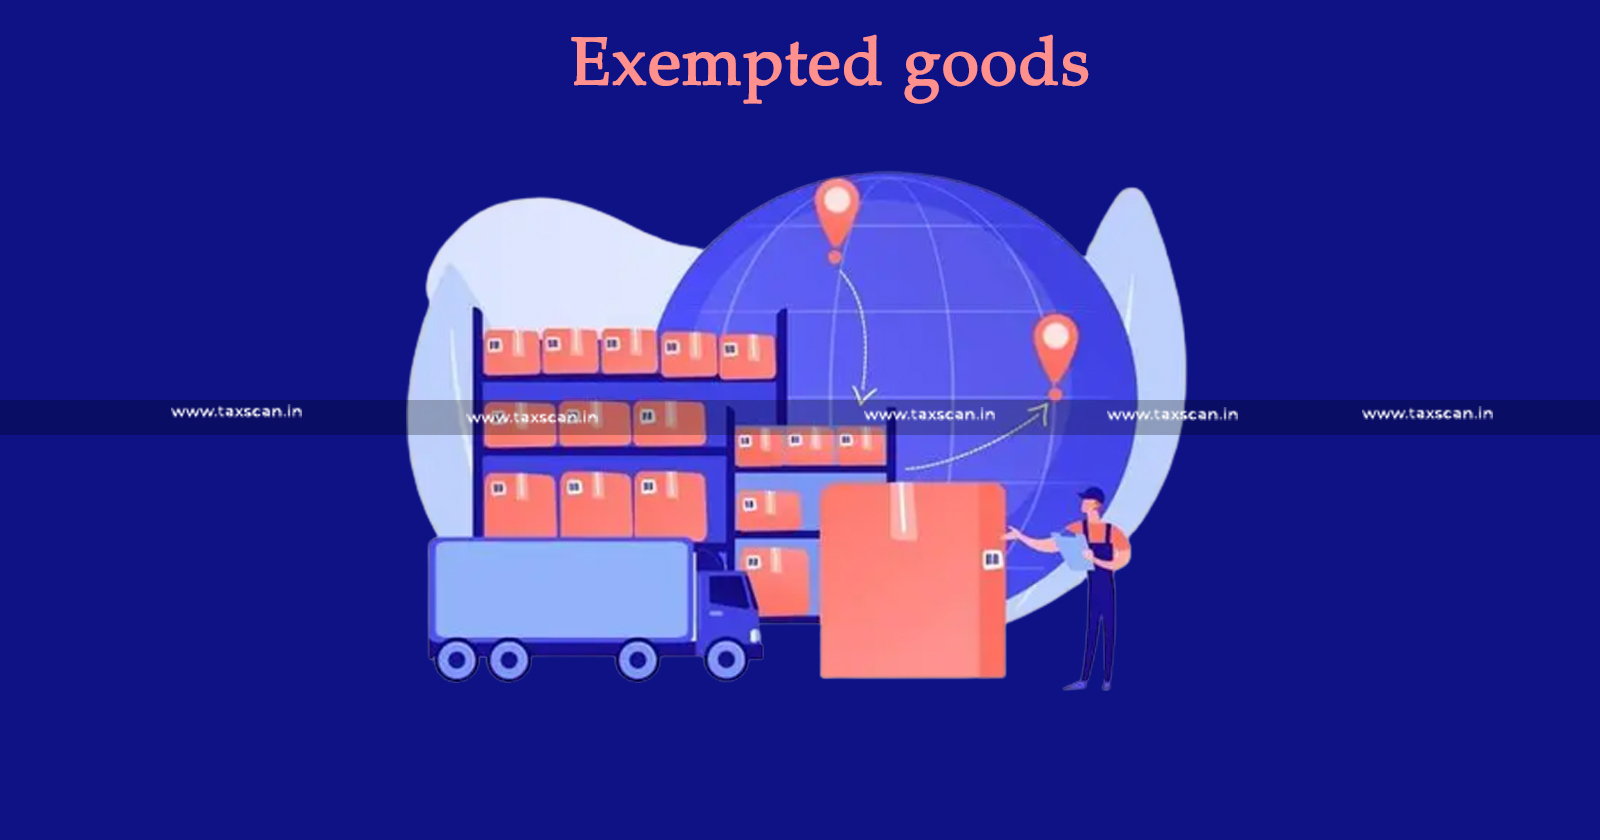 Confirmation - excise- duty - value -exempted- goods - merit-CESTAT - appeal-TAXSCAN